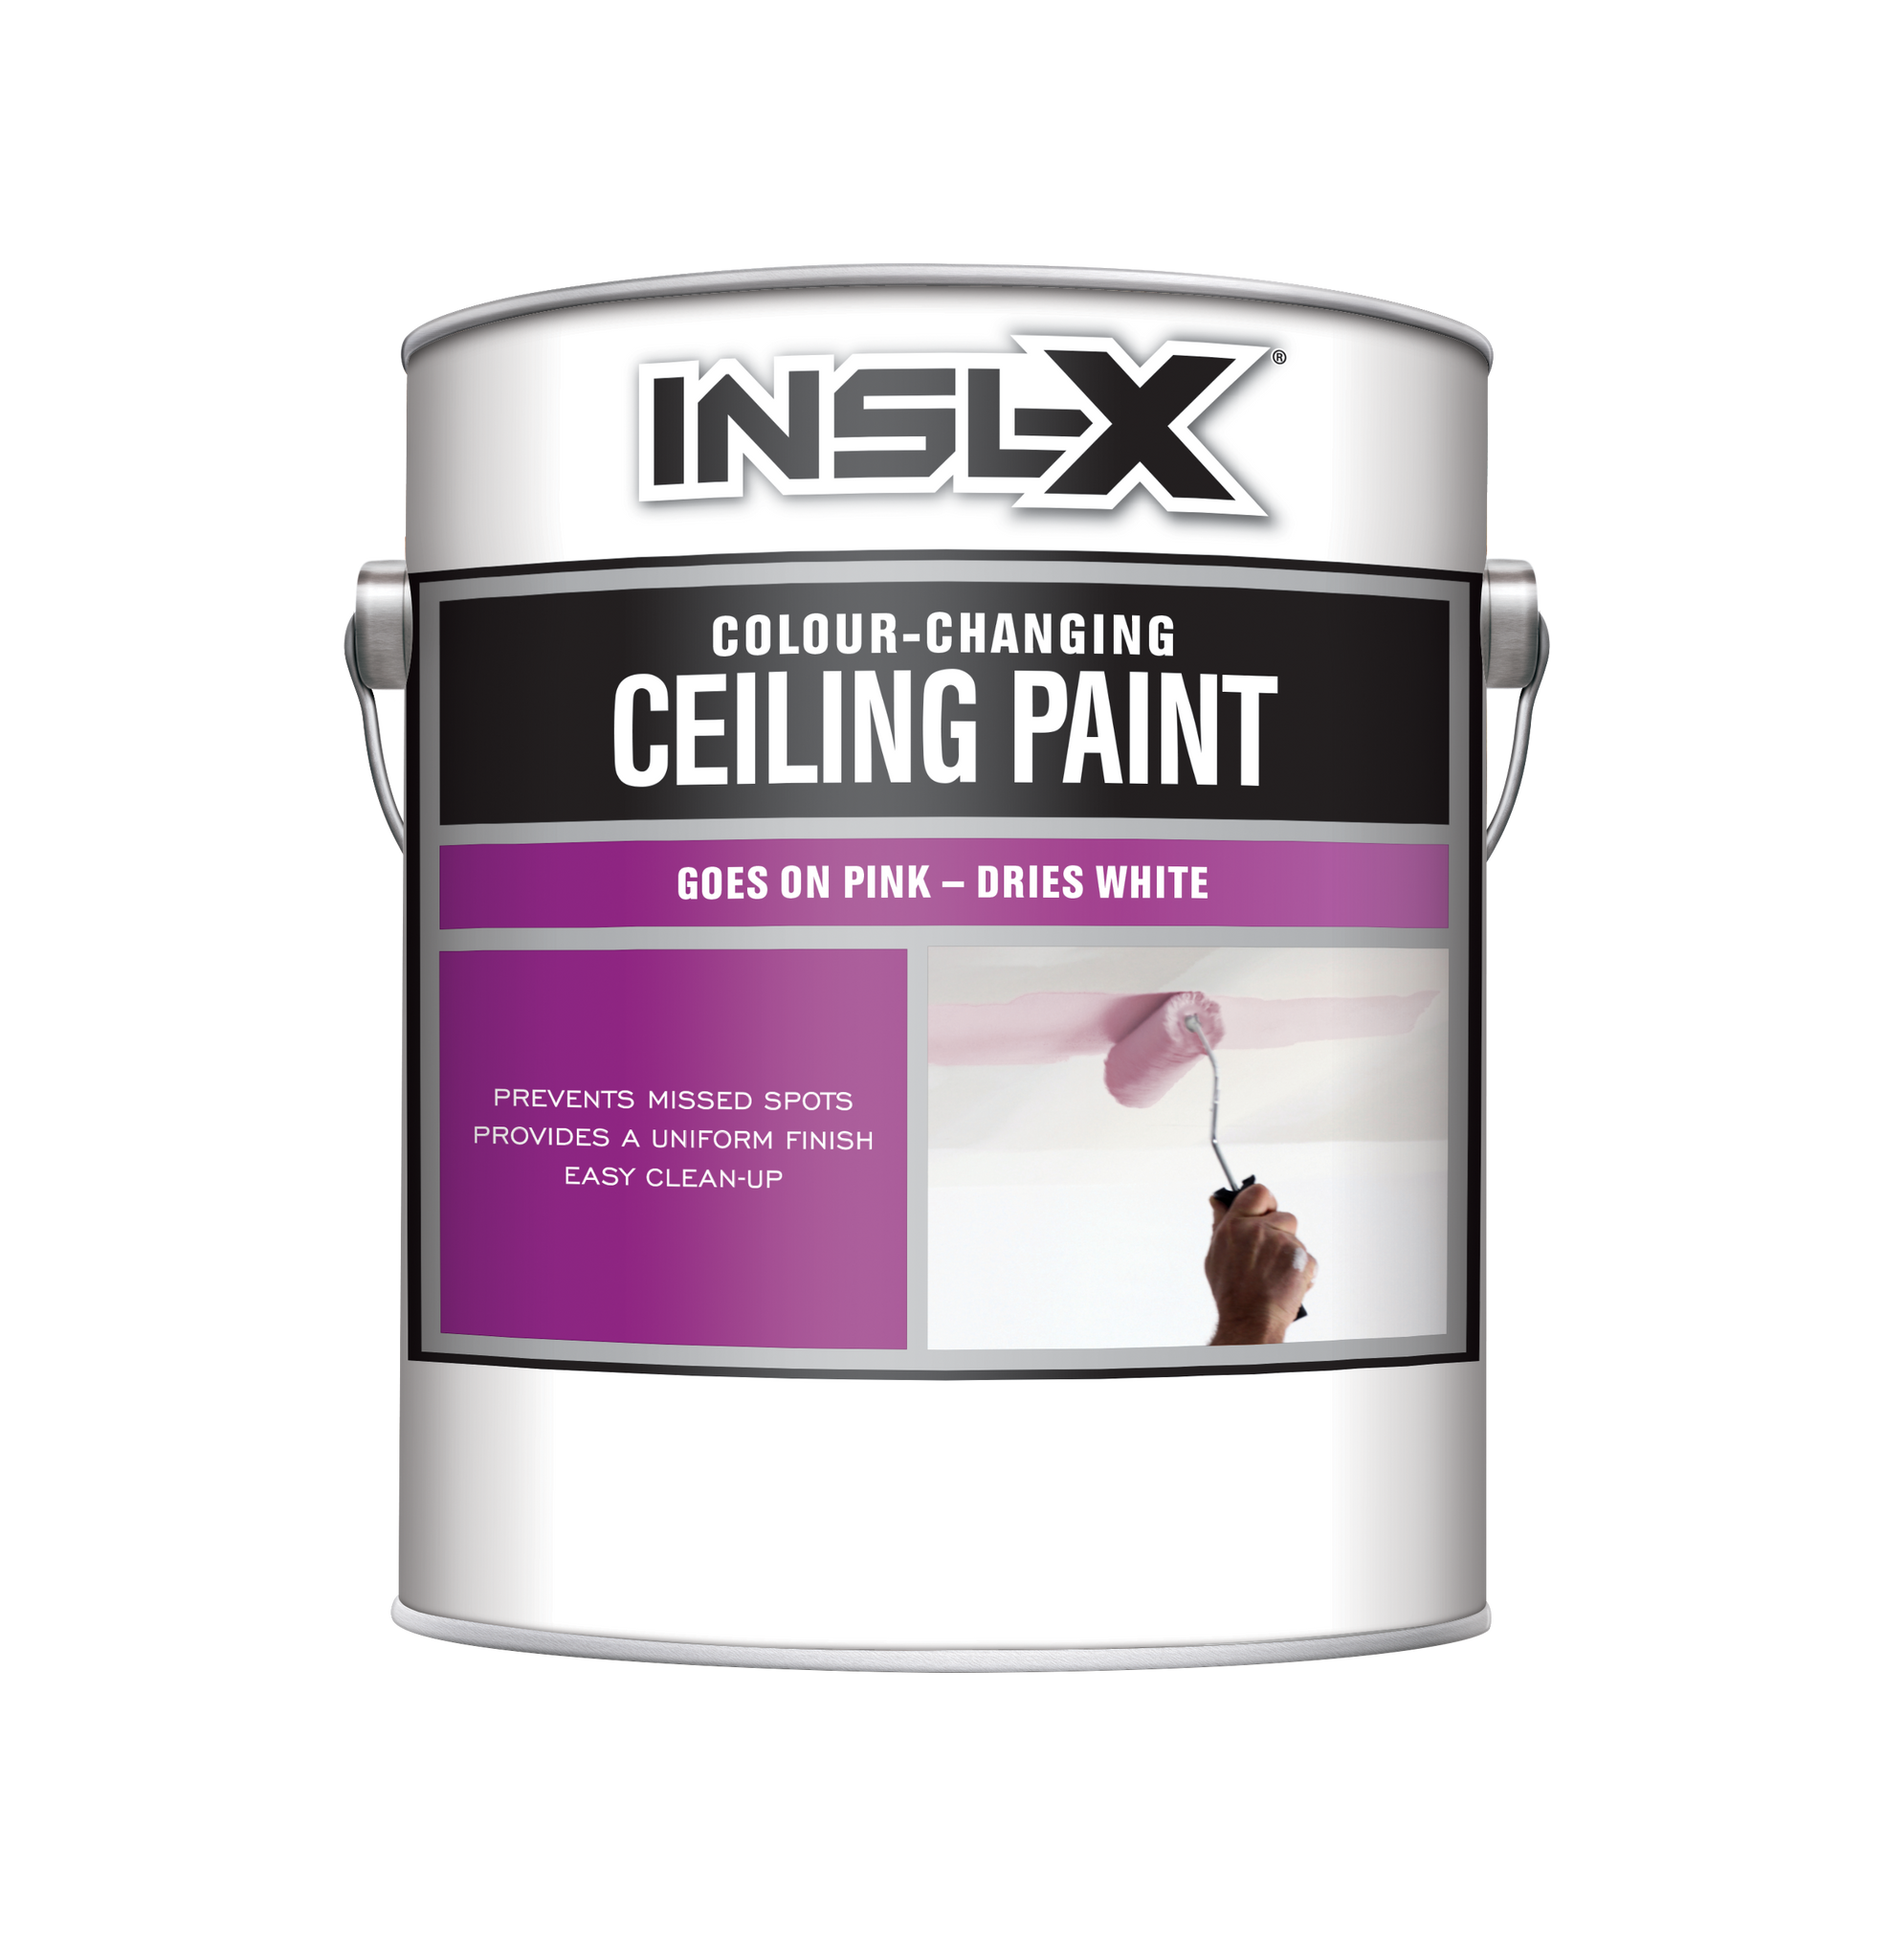 INSL-X COLOUR CHANGING CEILING PAINT